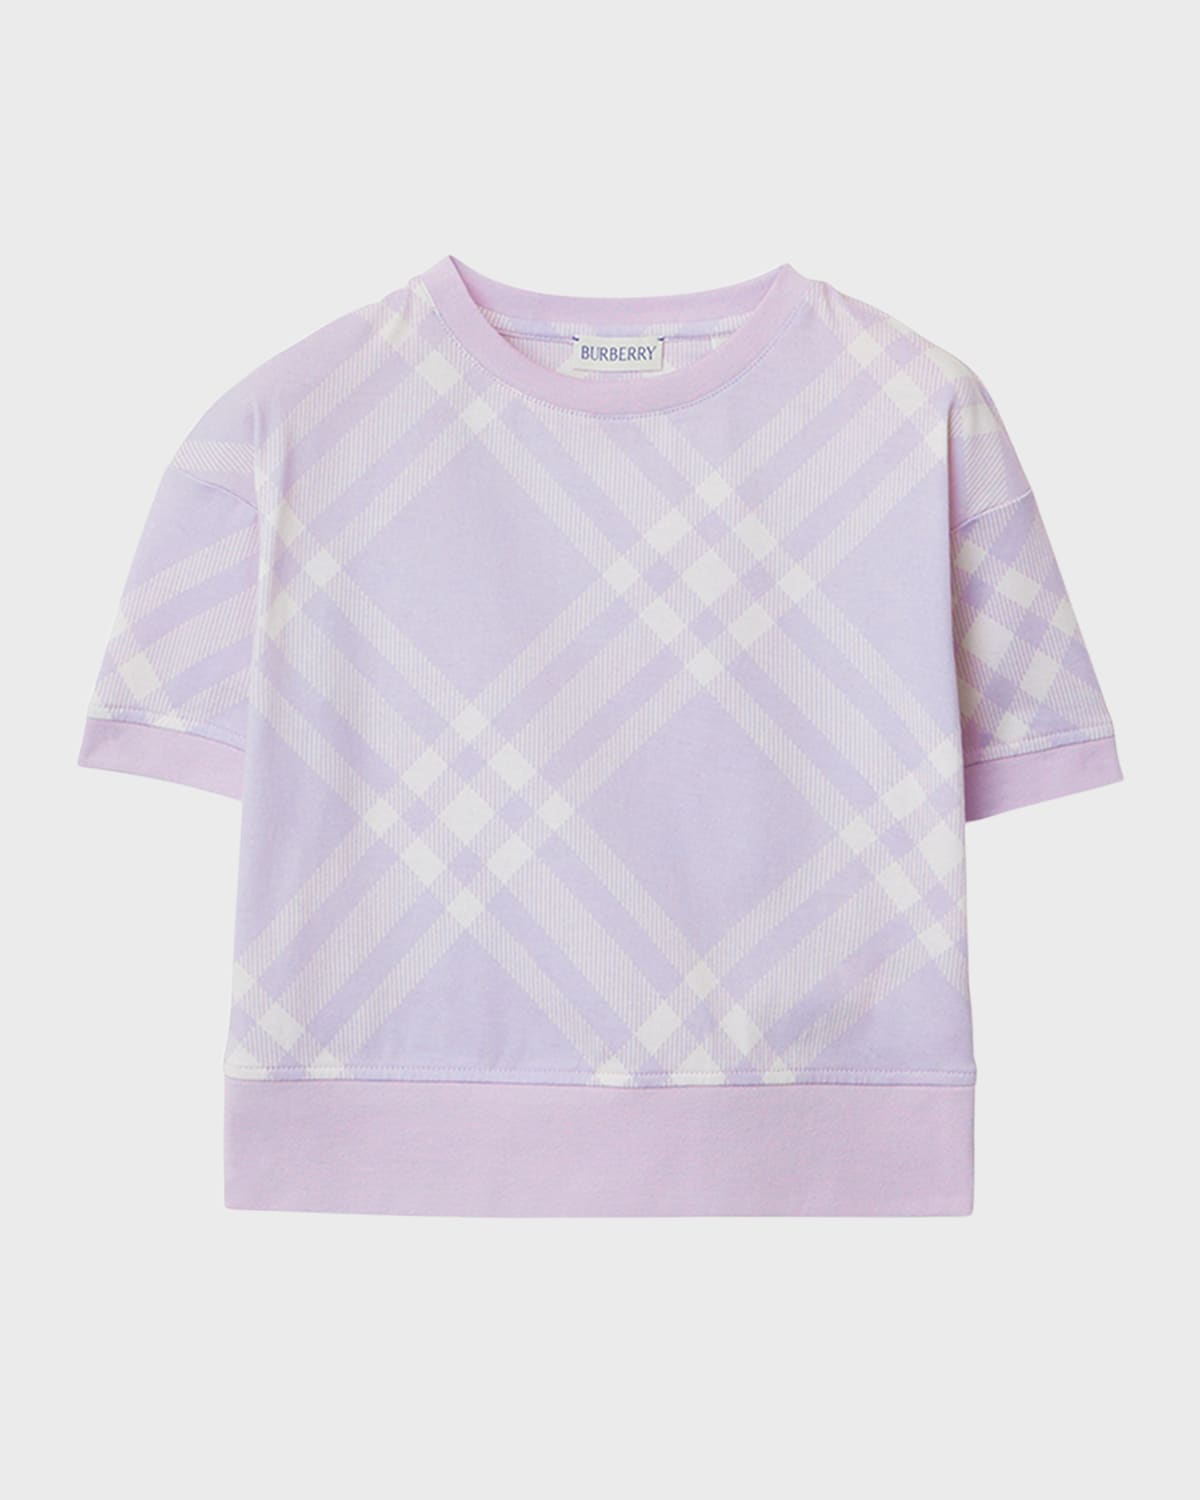 Burberry Kids' Girl's Bias Pastel Check Short-sleeve T-shirt In Pastel Lilac Chec